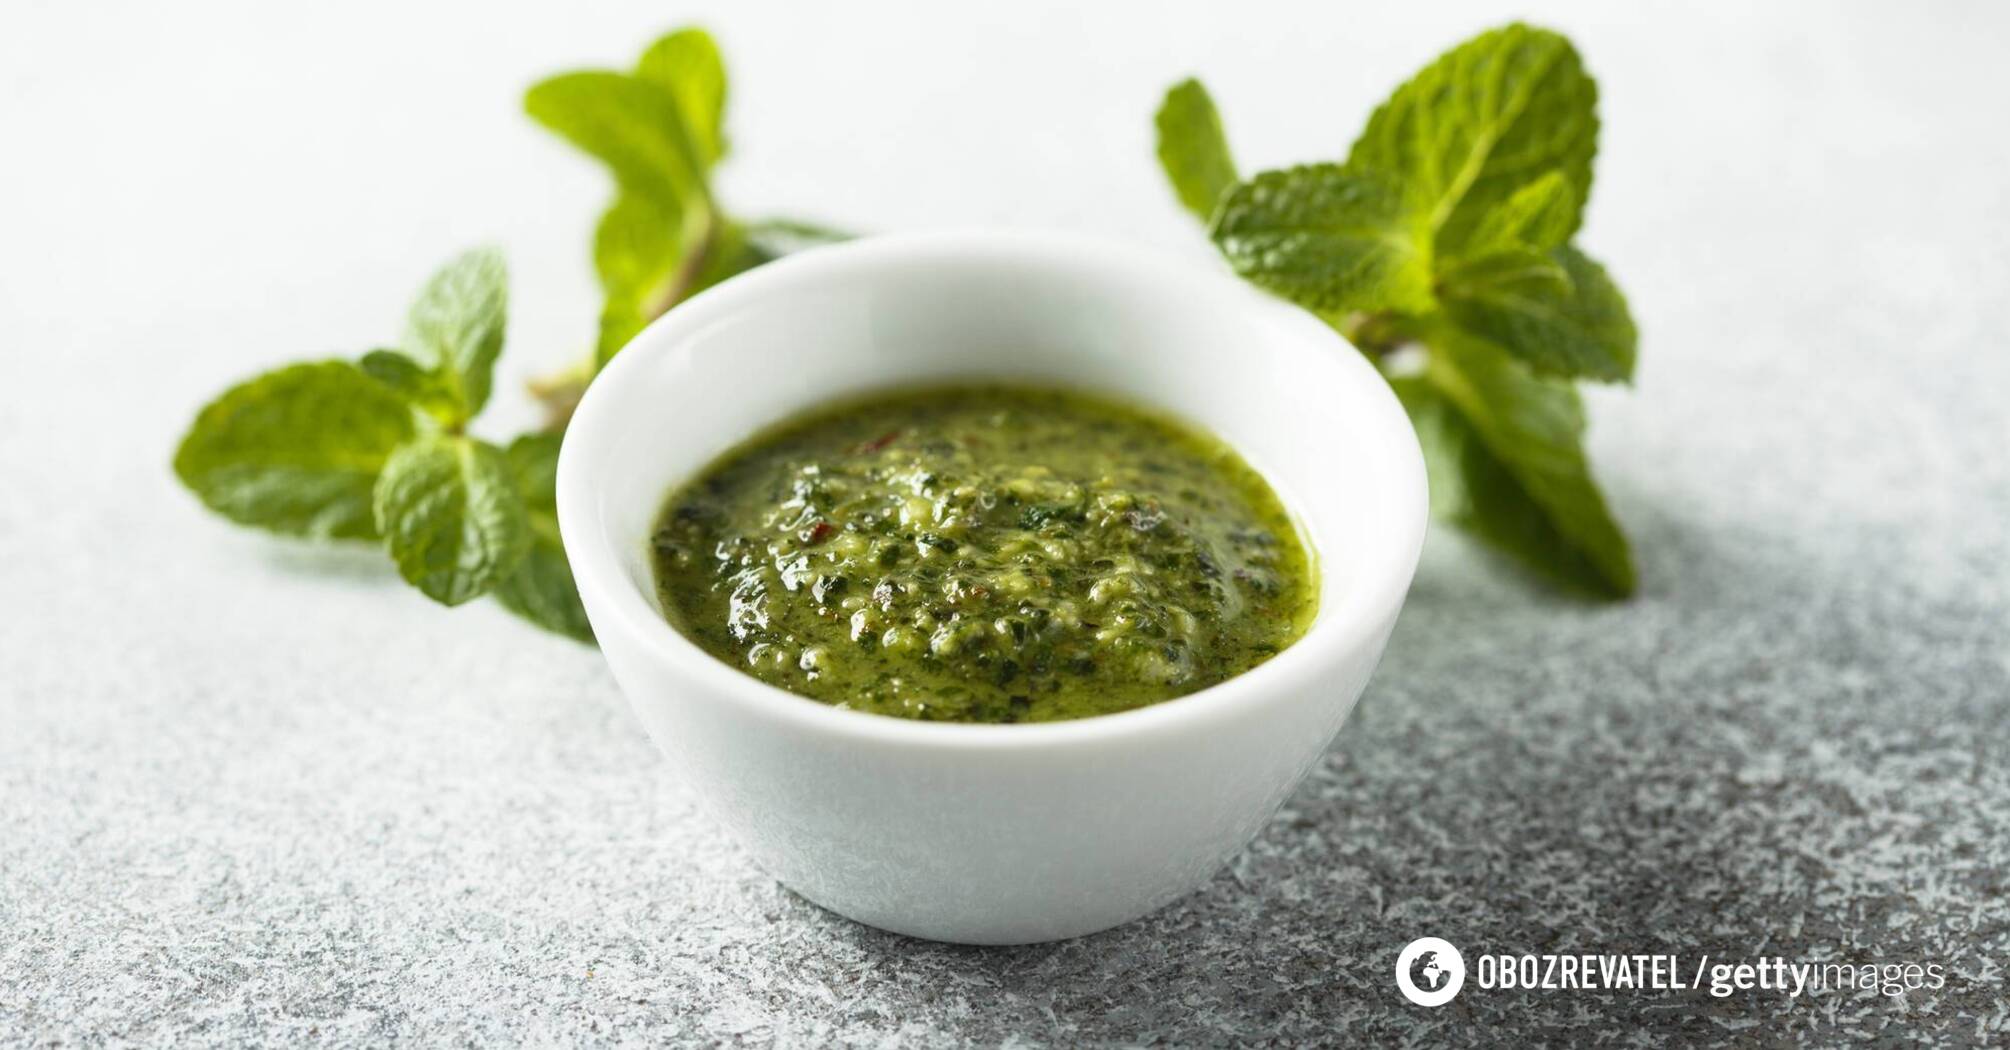 Mint pesto sauce can be used to flavor fish dishes